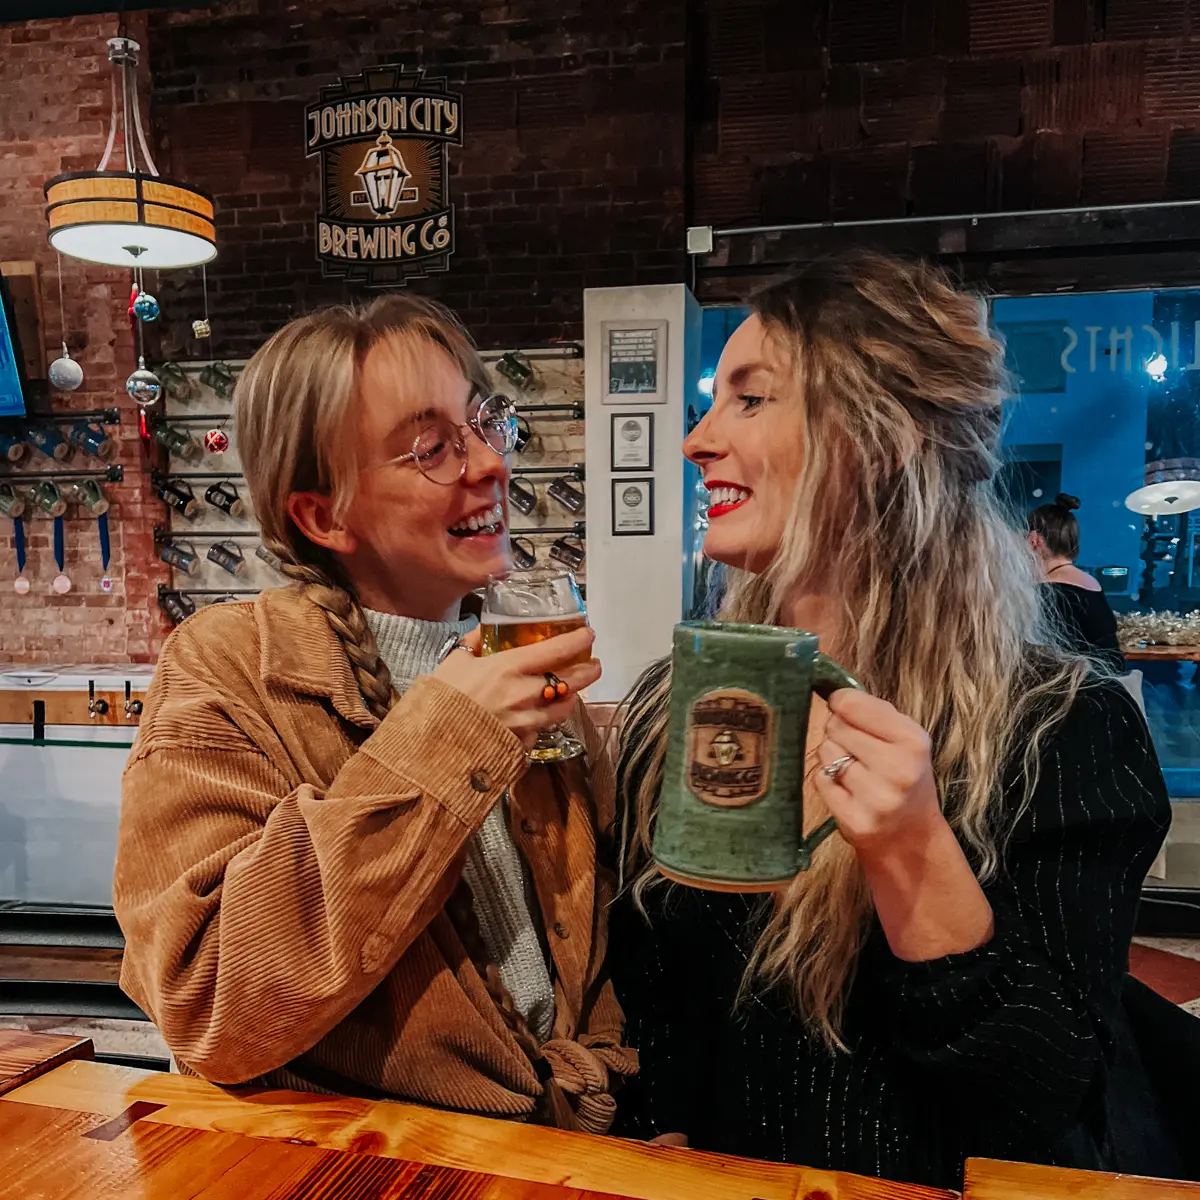 Sisters in a Johnson City brewery and owners of the Tennessee travel blog.